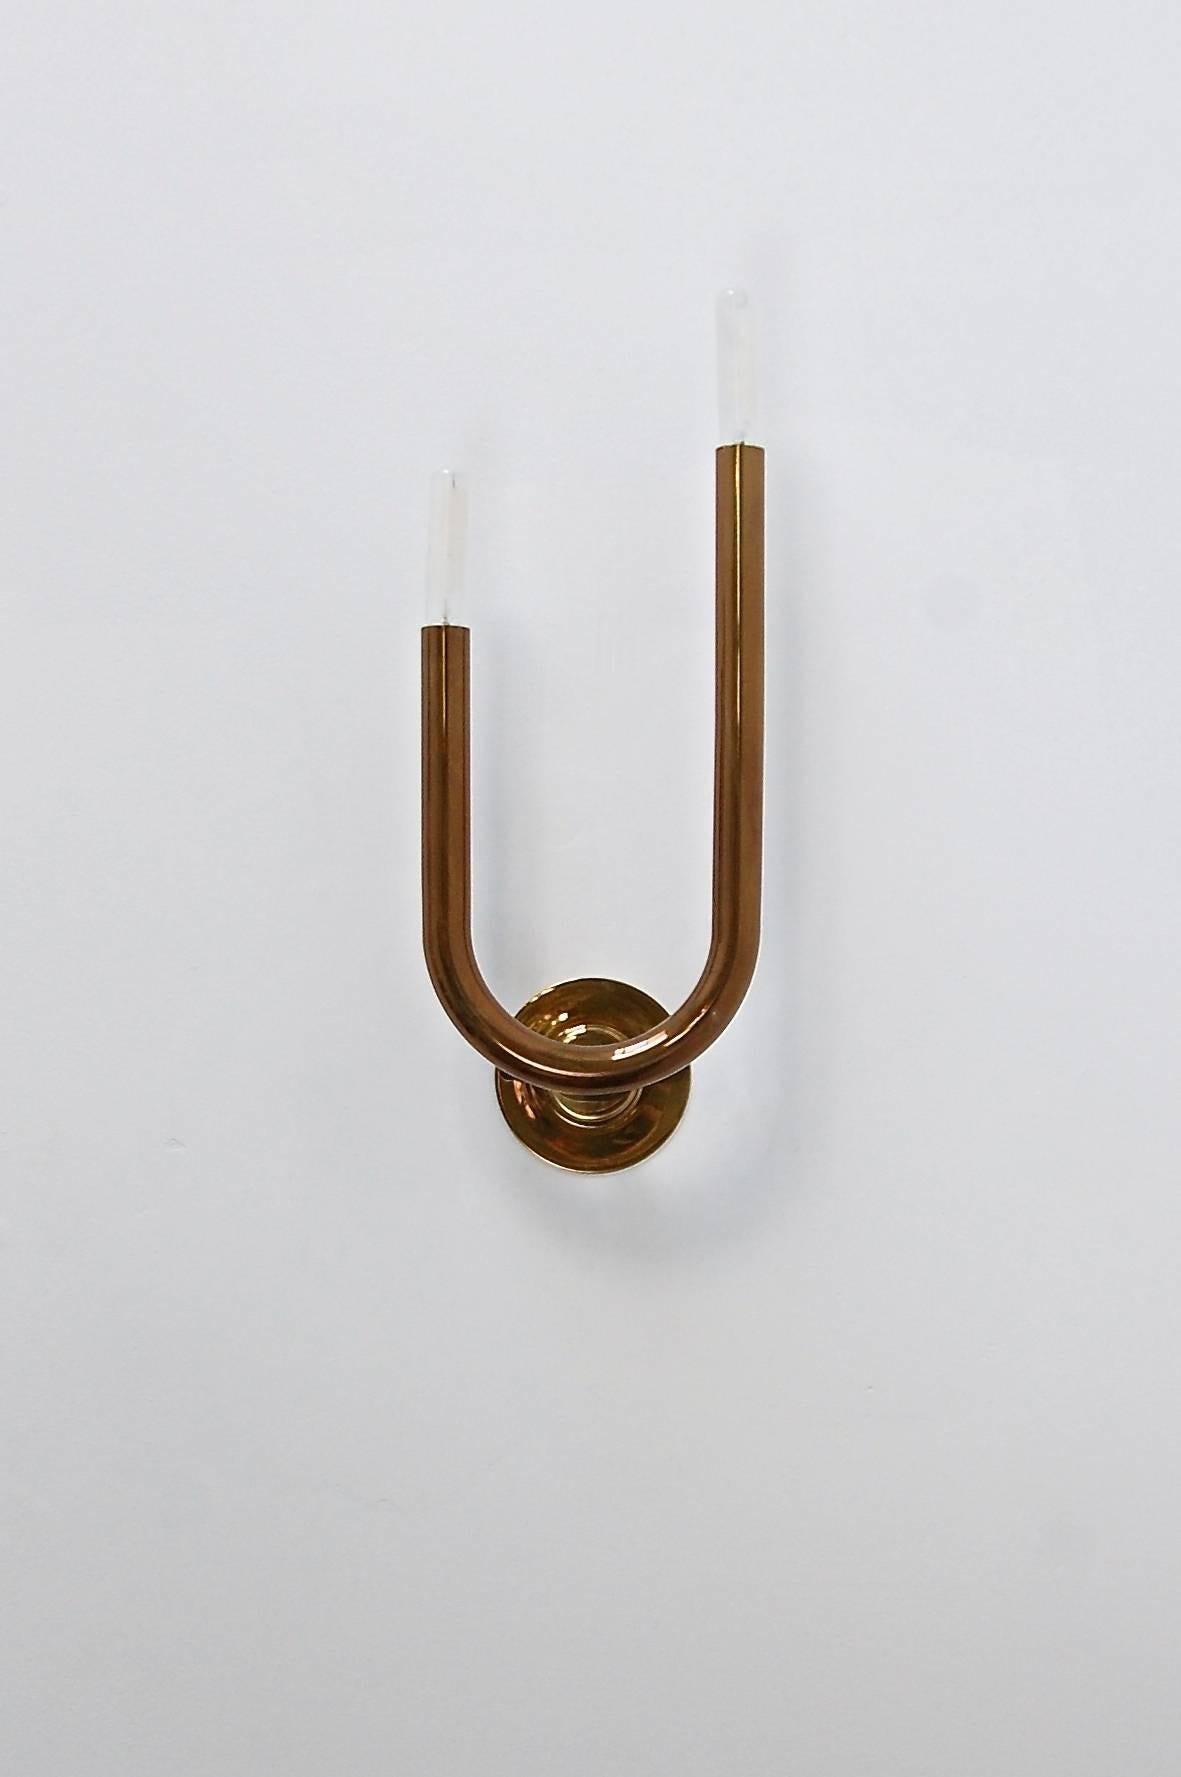 Superb and sleek modern LU Wall sconces by Lumfardo Luminaires lightly aged lacquered brass. Candelabra based sockets. Lightbulbs included. Priced as a pair. (left and right sconces)

Measurements are with bulbs.